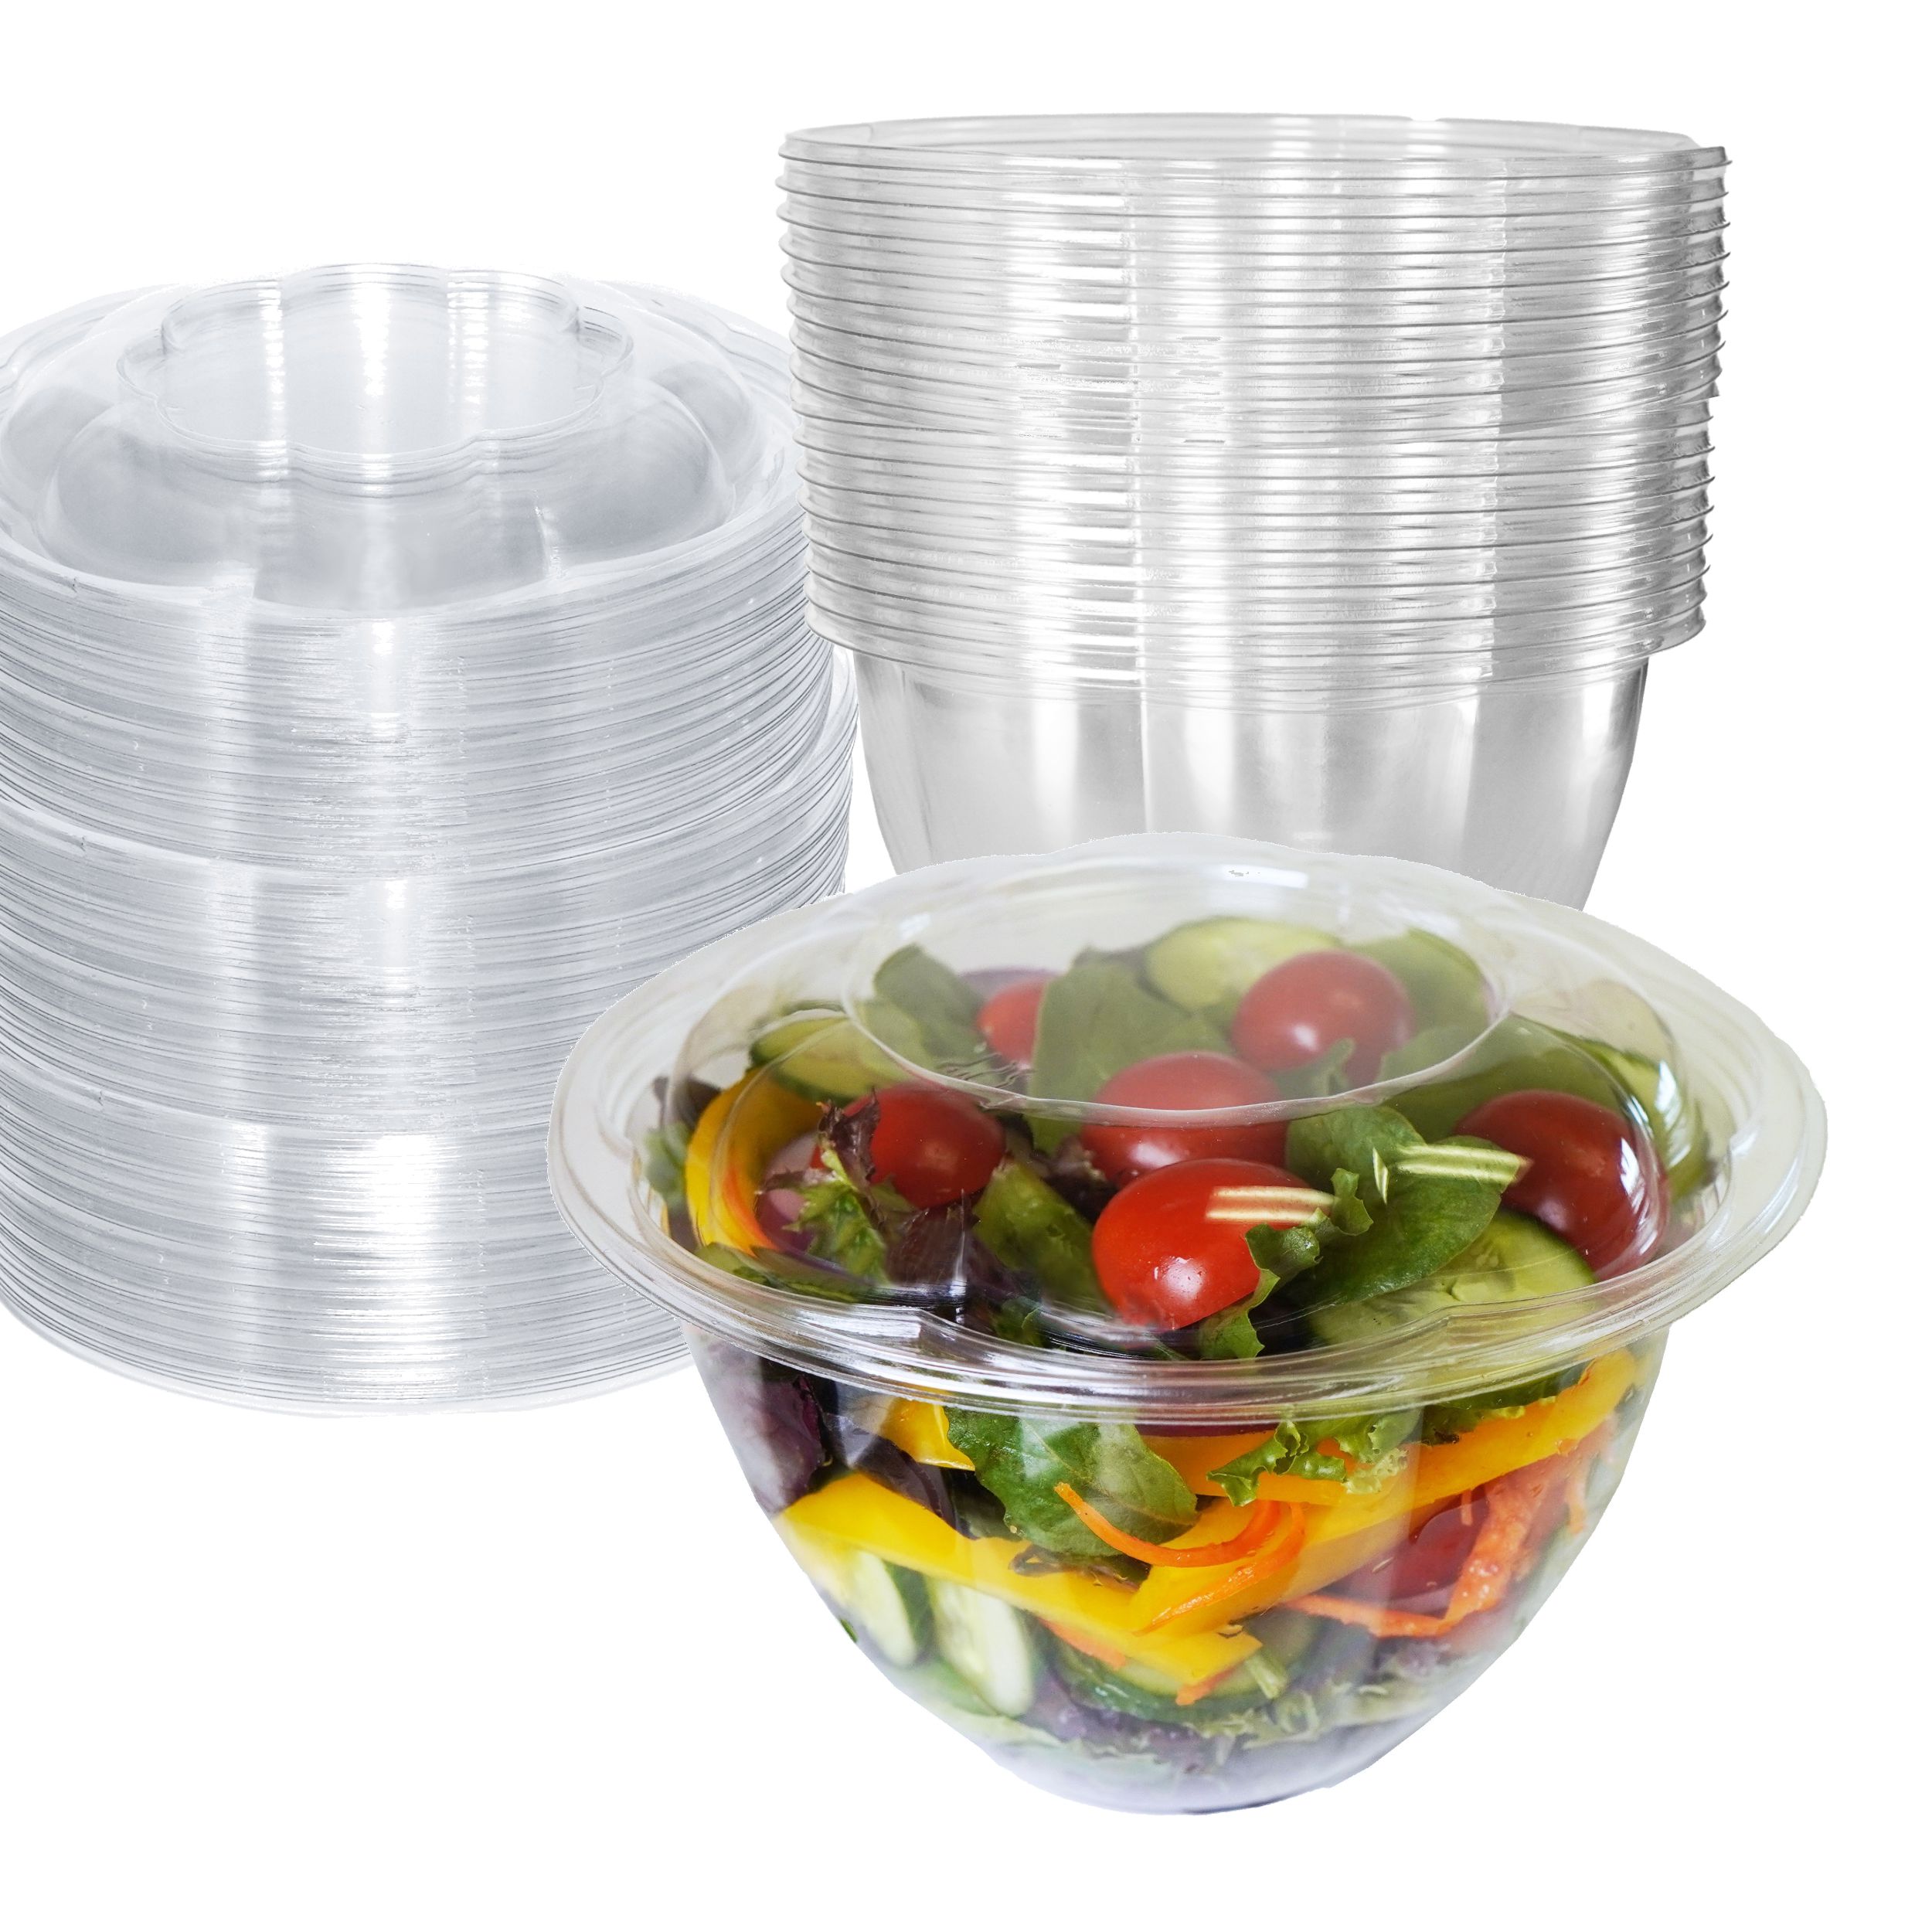 [50 PACK] 48oz Clear Disposable Salad Bowls with Lids - Clear Plastic Disposable Salad Containers for Lunch To-Go, Salads, Fruits, Airtight, Leak Proof, Fresh, Meal Prep | Rose Bowl Container (48 OZ) - image 1 of 7